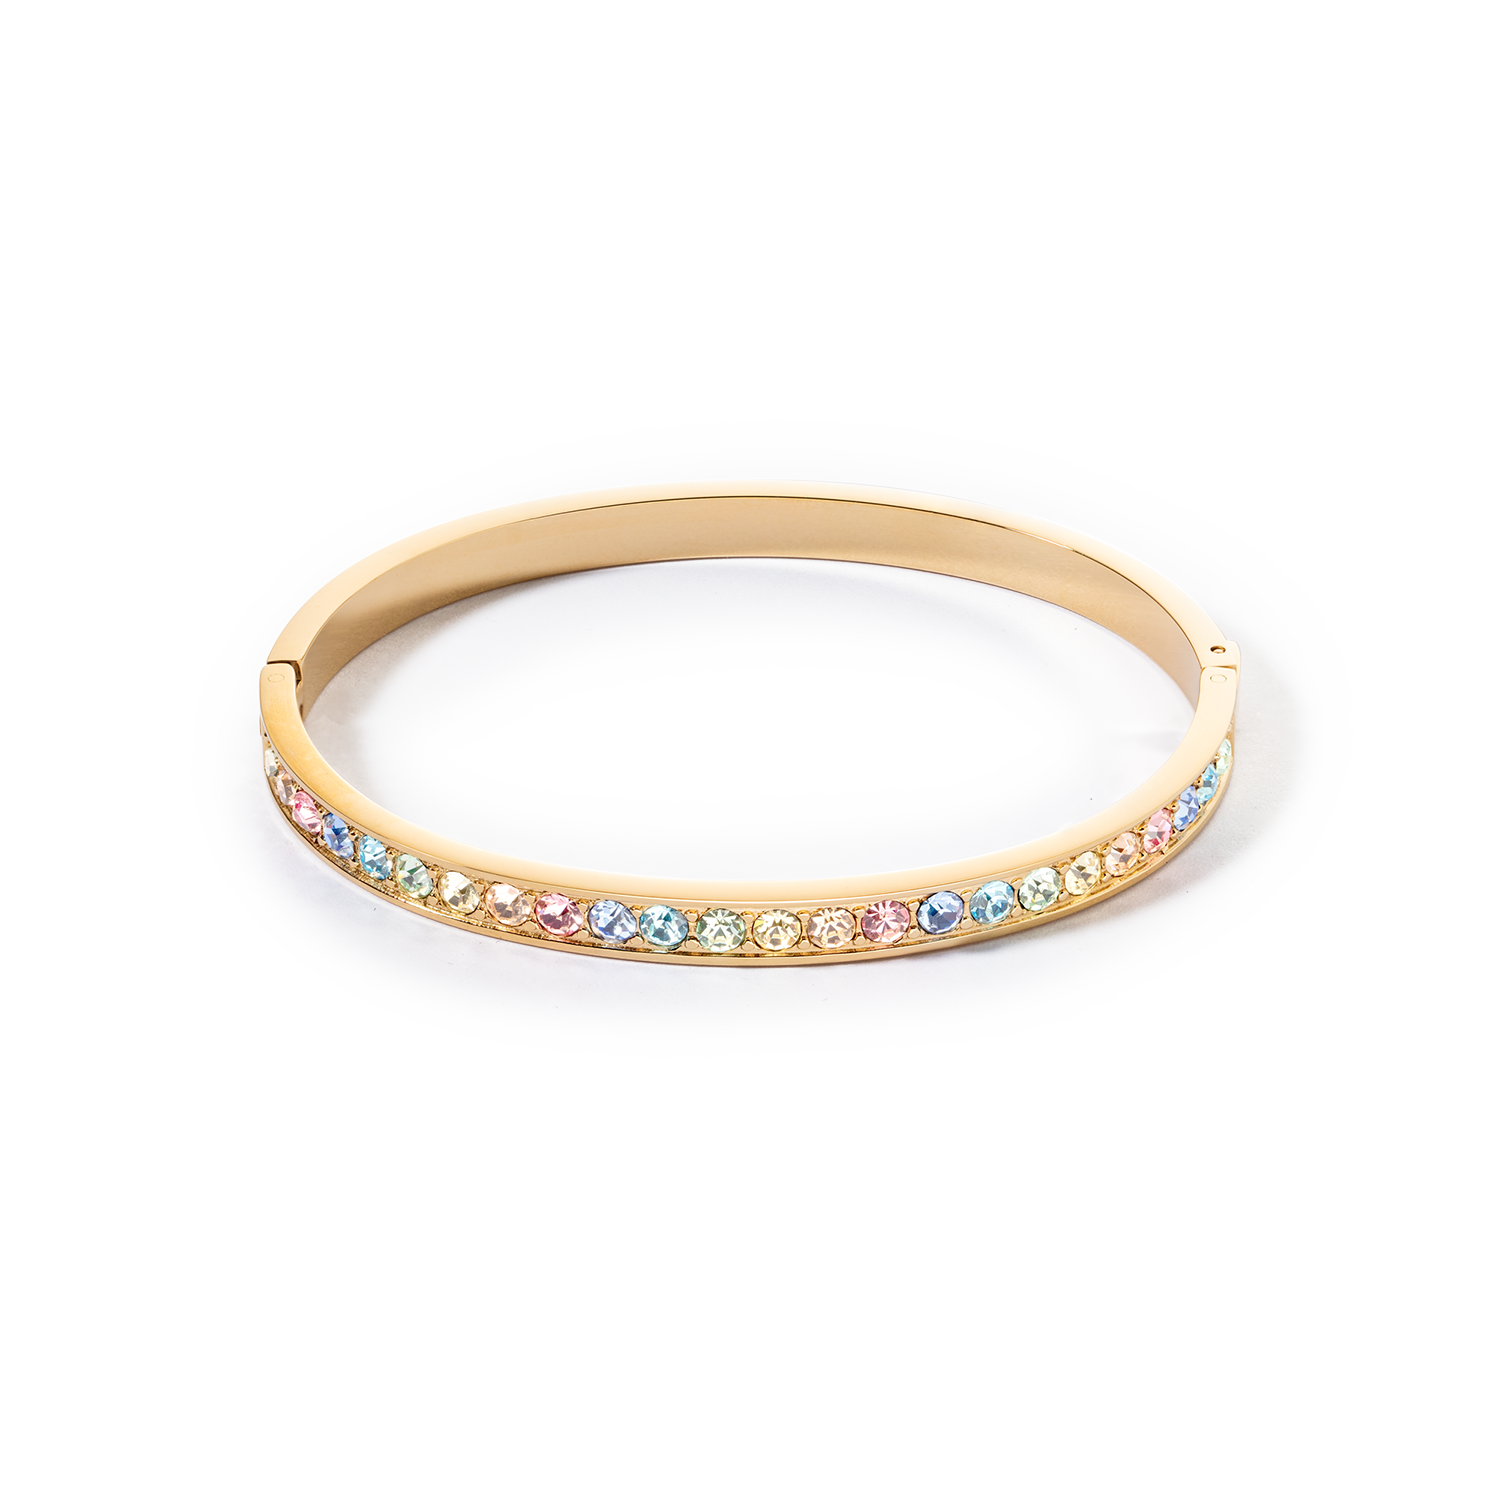 Bangle stainless steel & crystals gold multi pastel 19